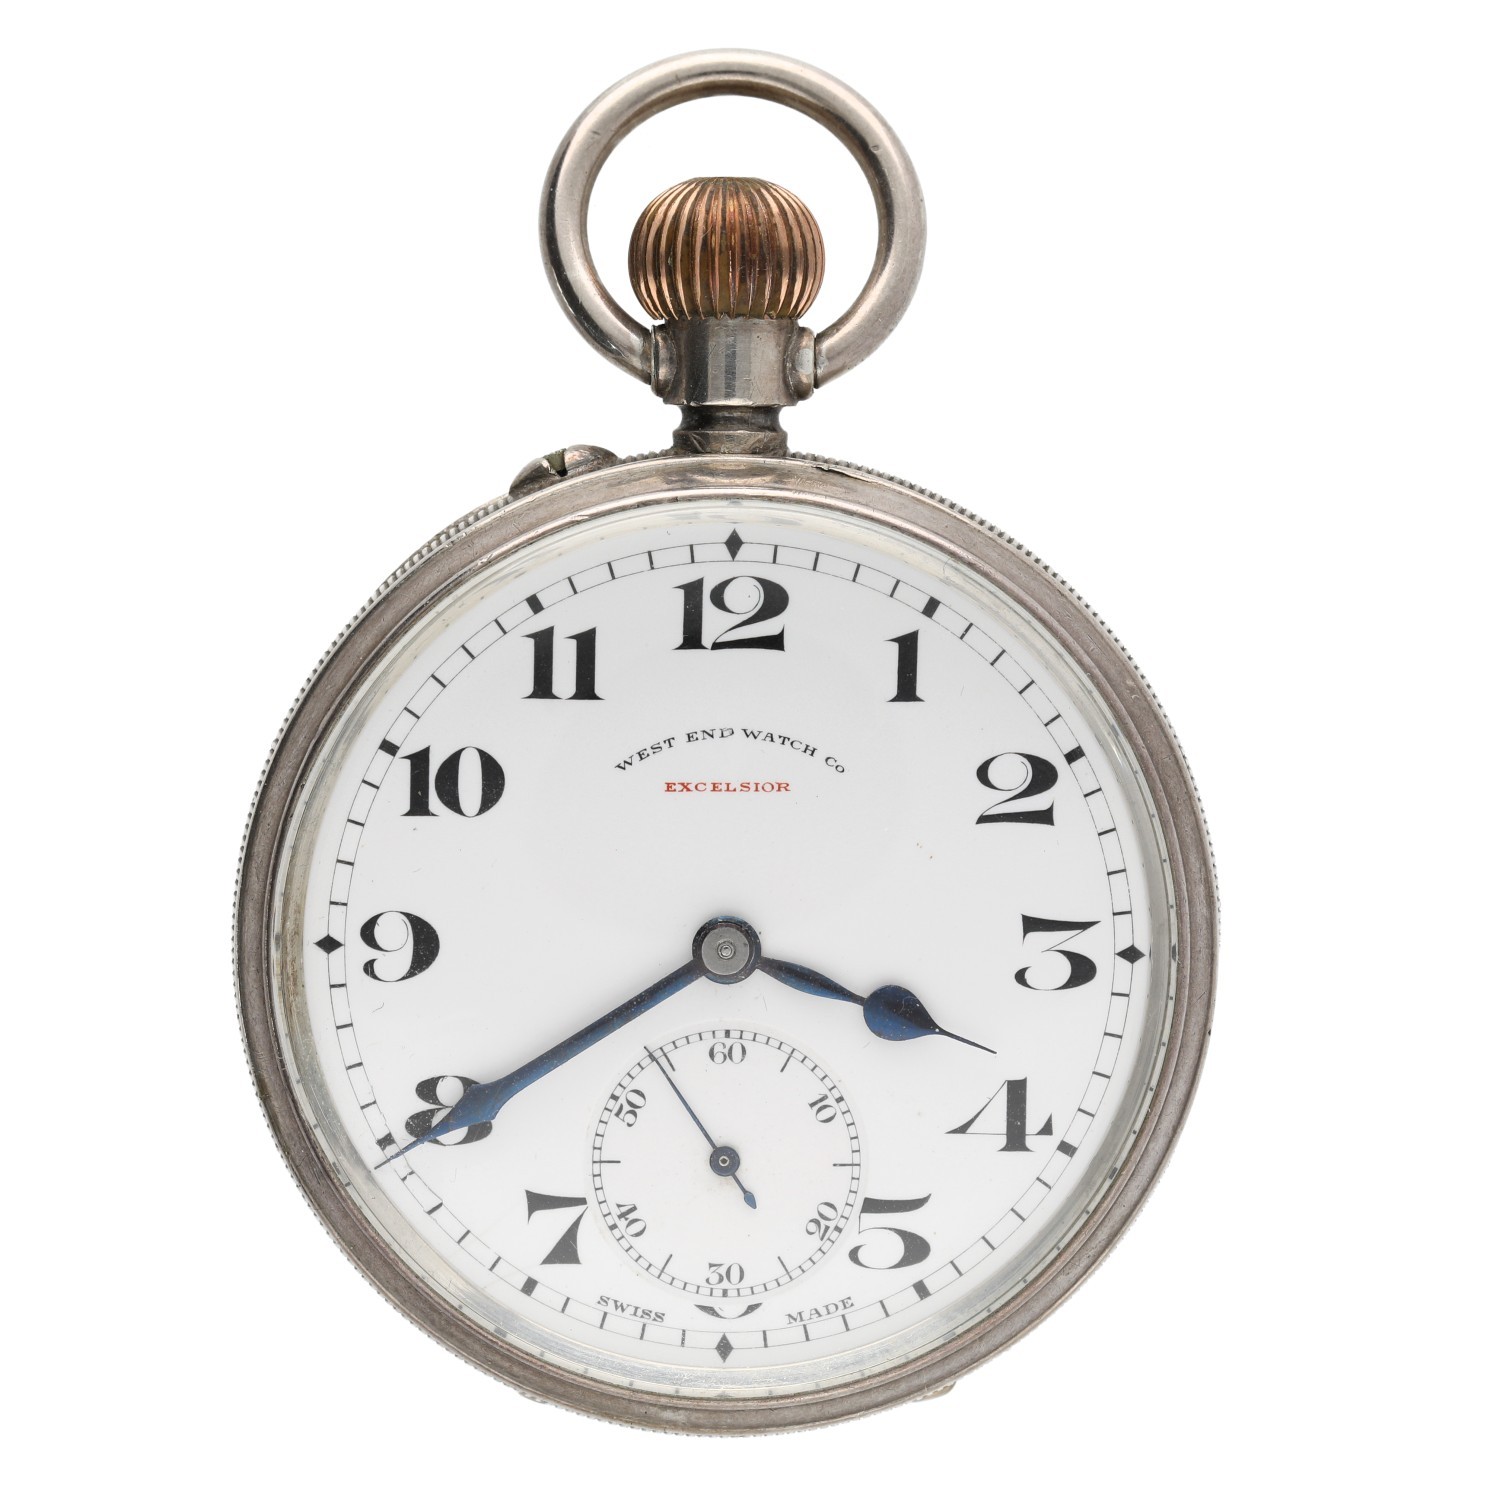 West End Watch Co. 'Excelsior' silver (0.925) lever pocket watch, Longines cal. 19.96 signed - Image 2 of 4